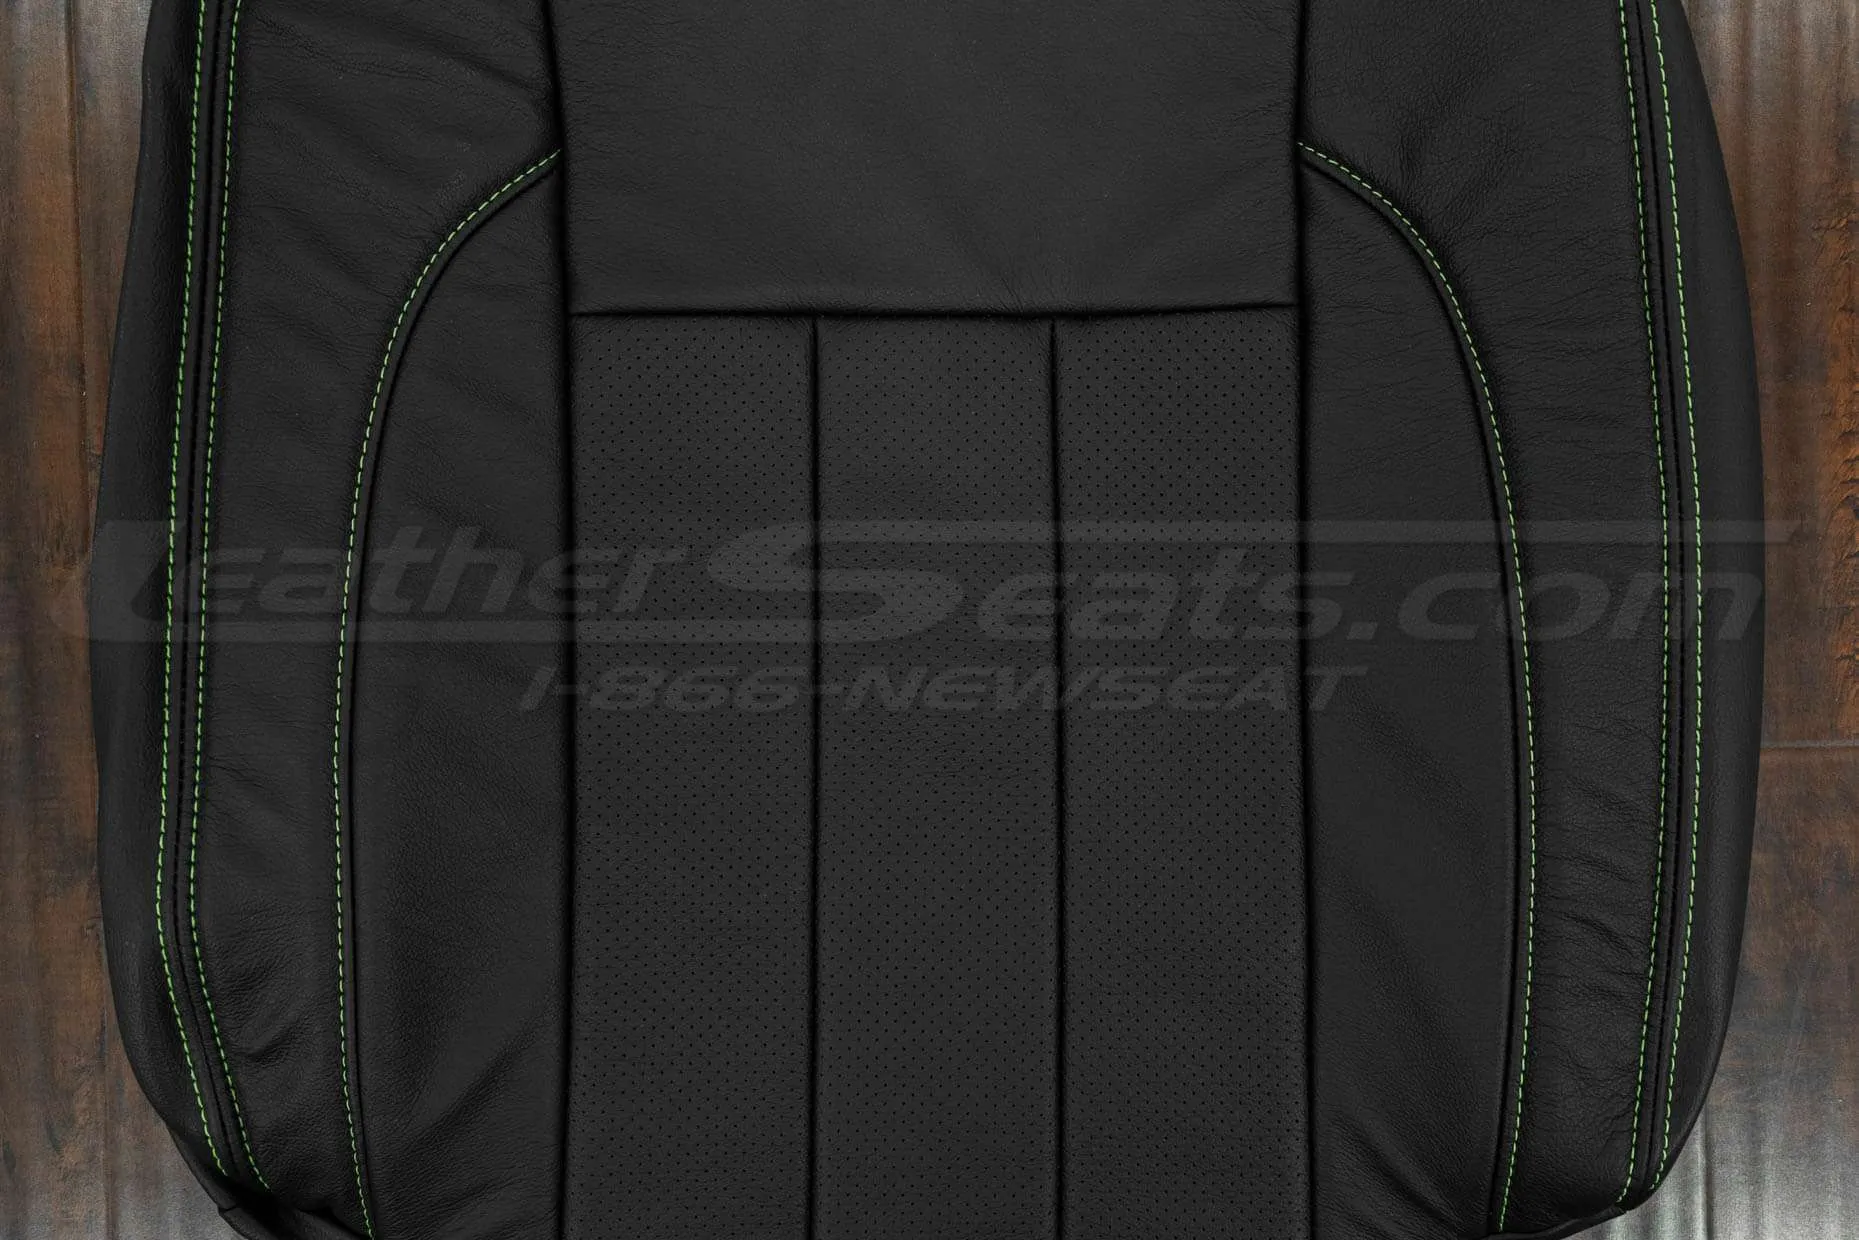 Perforated insert section of backrest